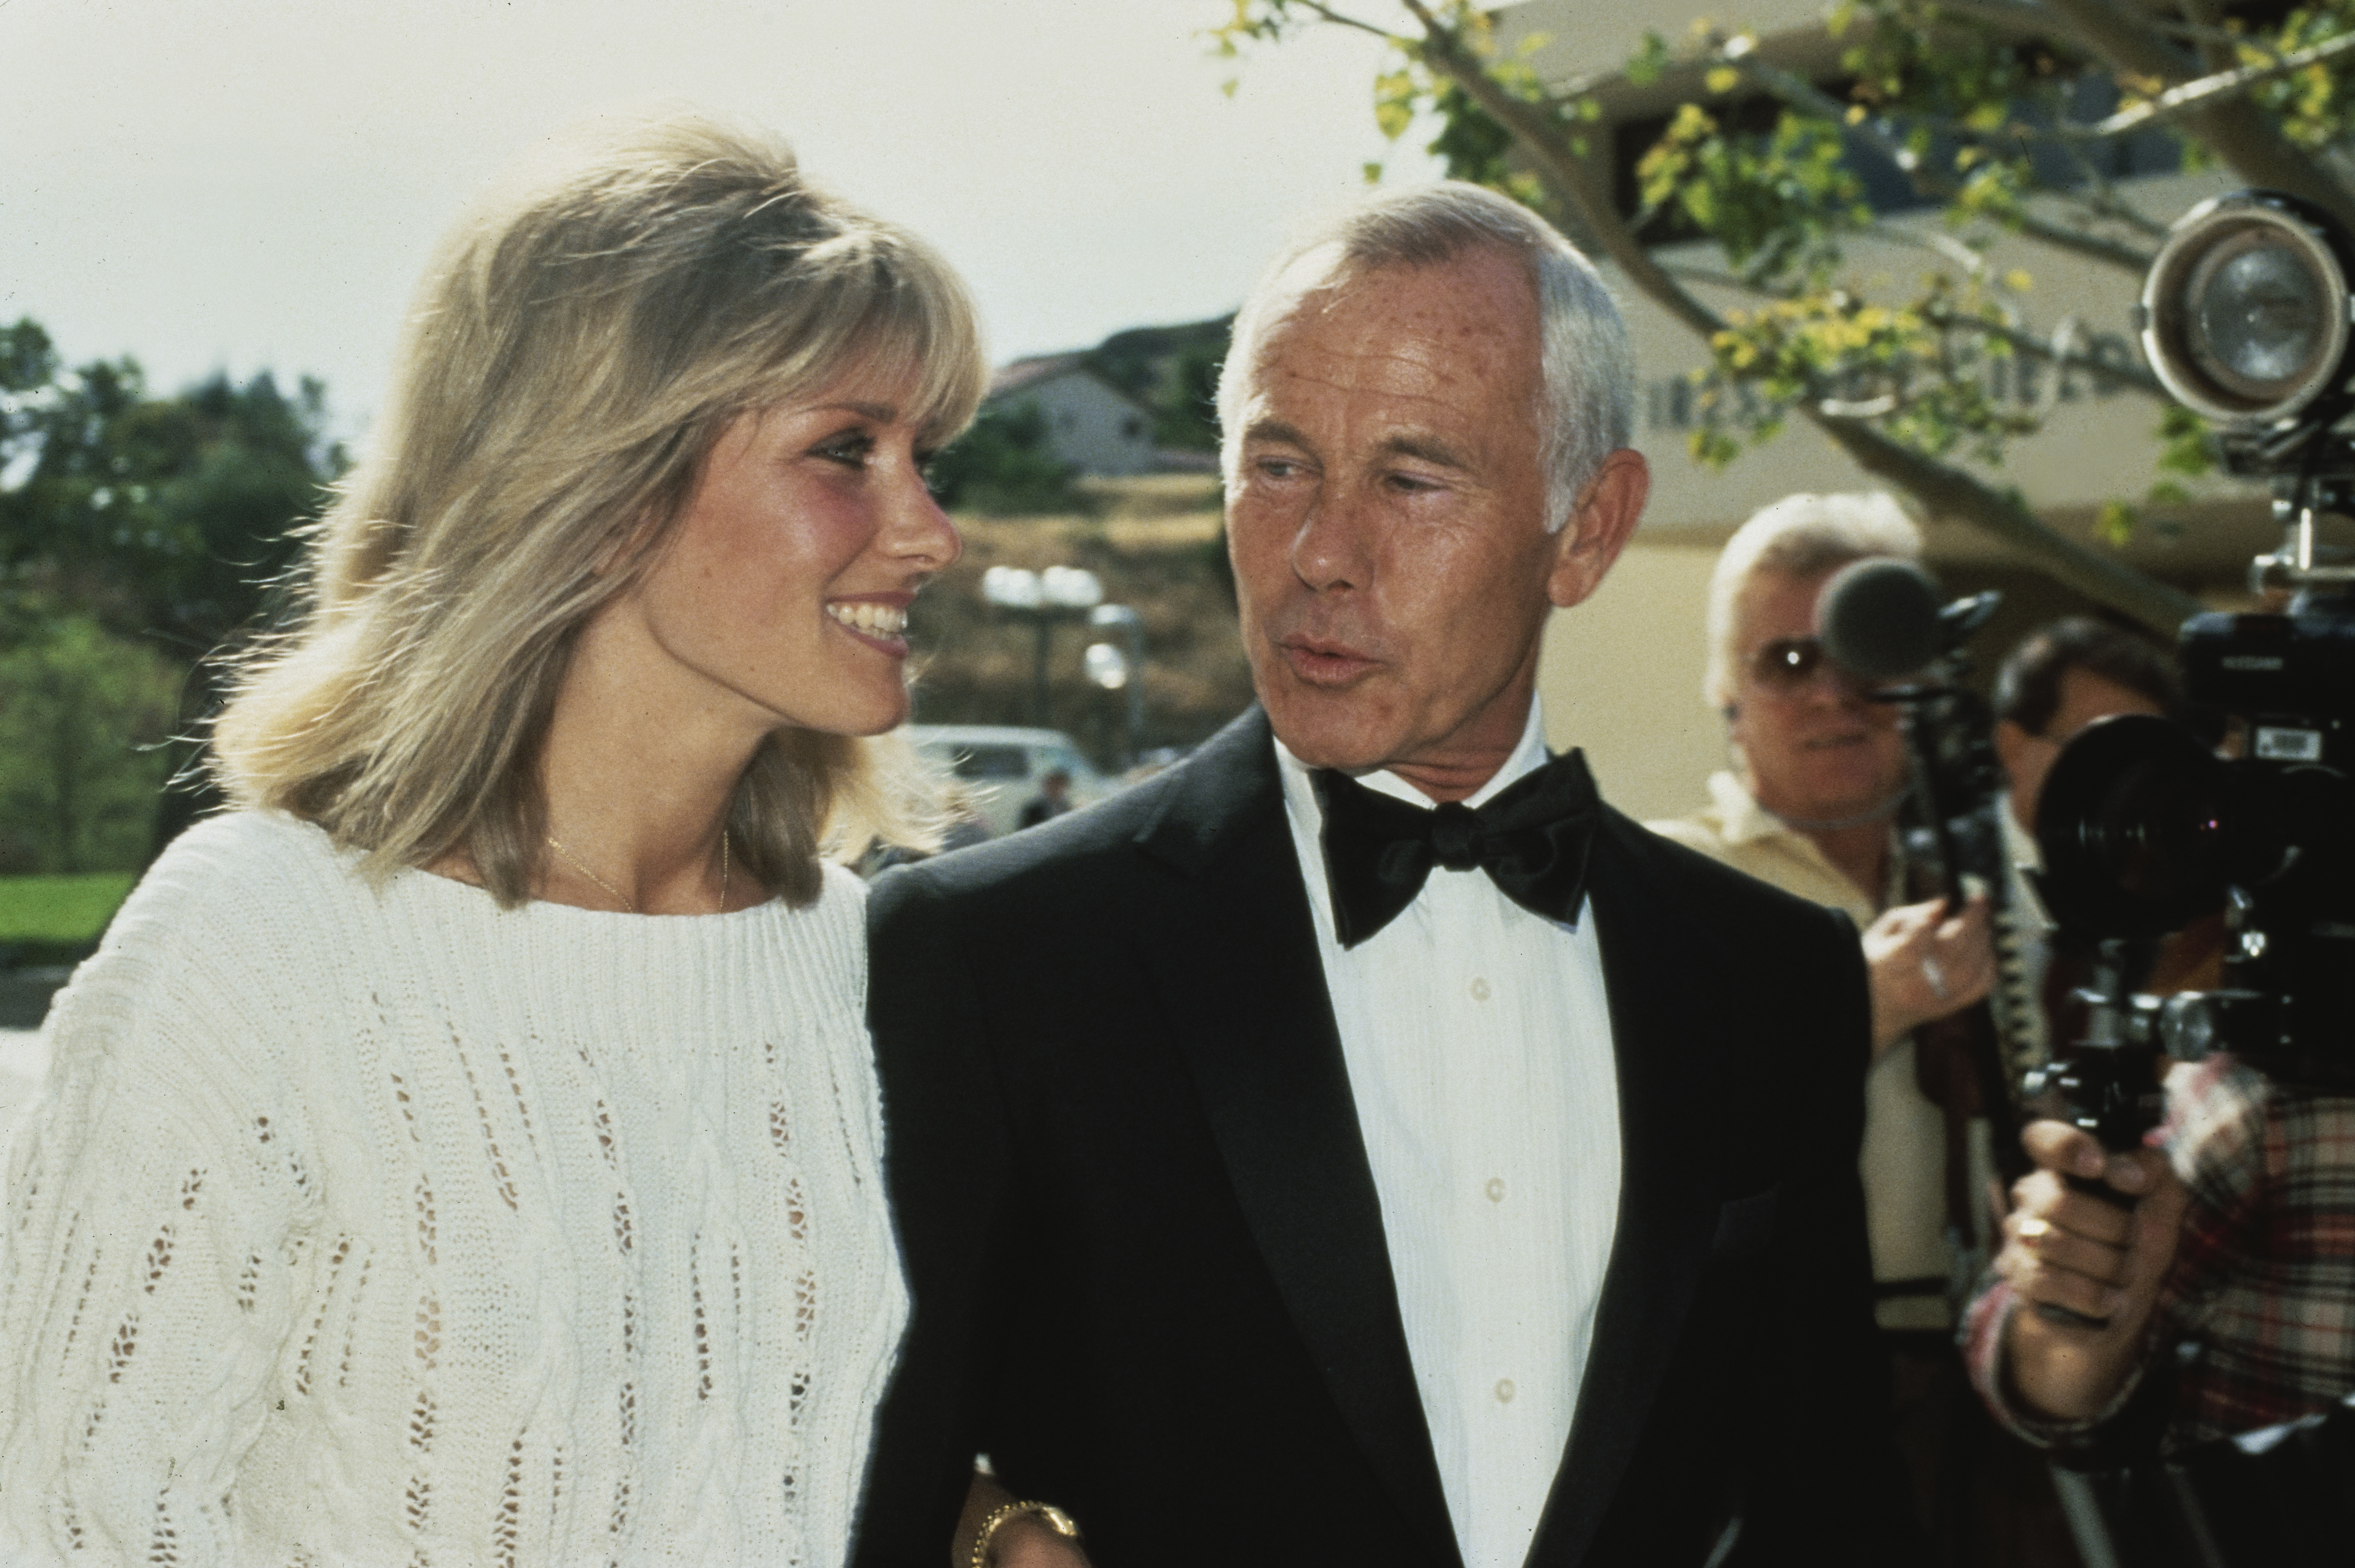 Johnny Carson and wife Alexis Maas attend the 2nd Annual Benefit Concert for the Malibu Emergency Room at Pepperdine University's Firestone Field house in Malibu, California, United States, on March 18, 1984. | Source: Getty Images